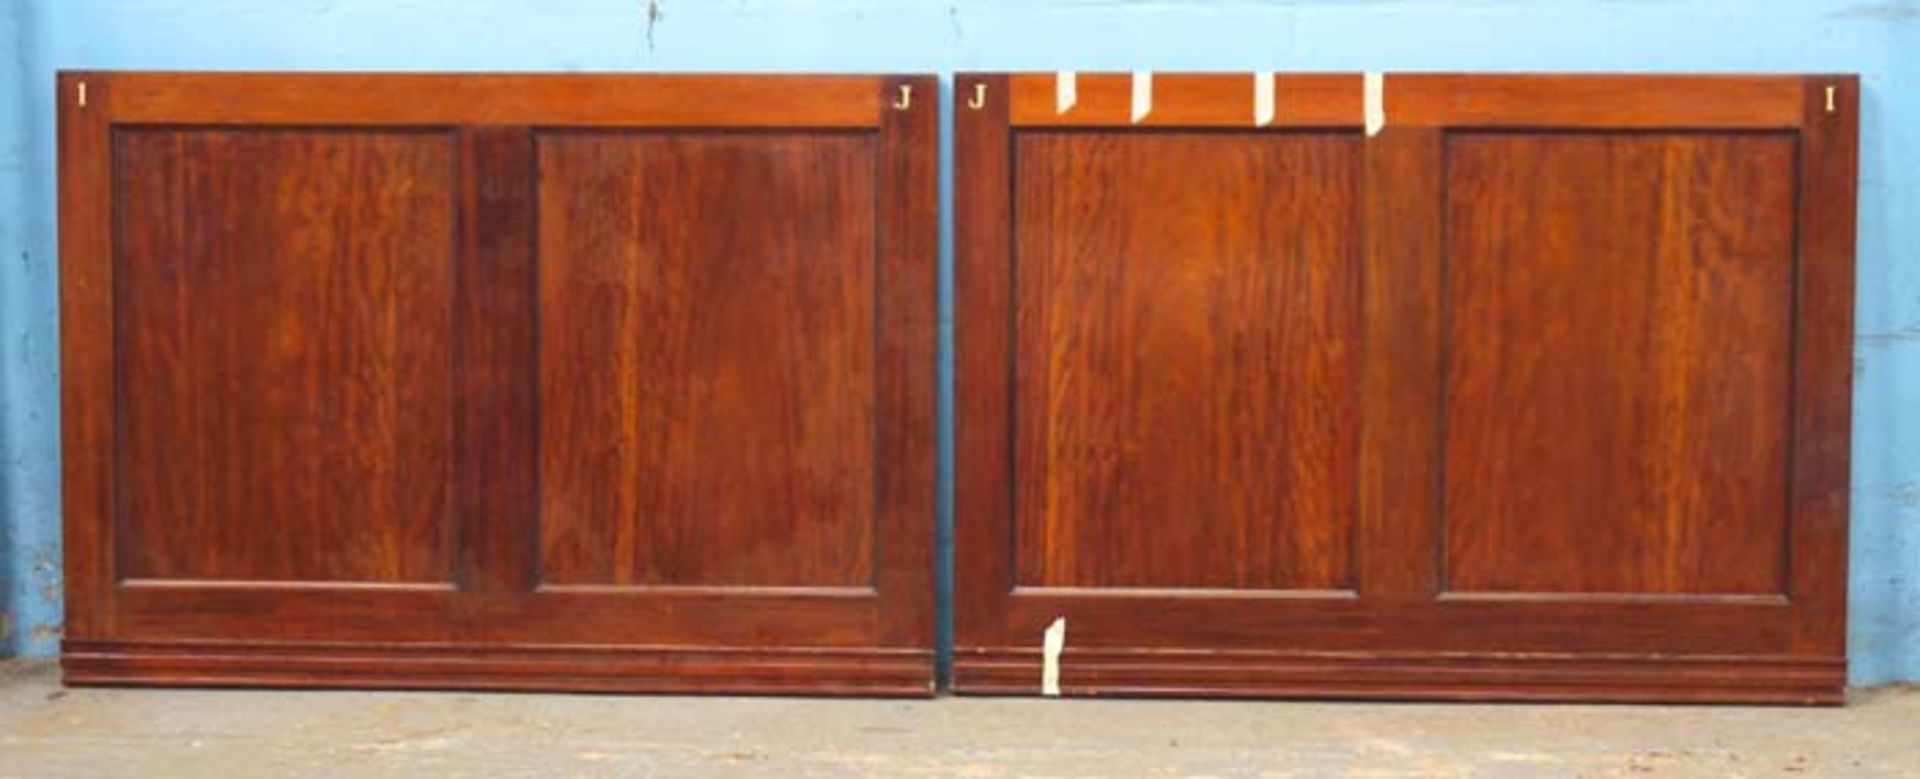 *TWO ANTIQUE MAHOGANY DADO PANELS RECLAIMED FROM A VICTORIAN DISPLAY CABINET FROM THE VICTORIA & - Image 4 of 4